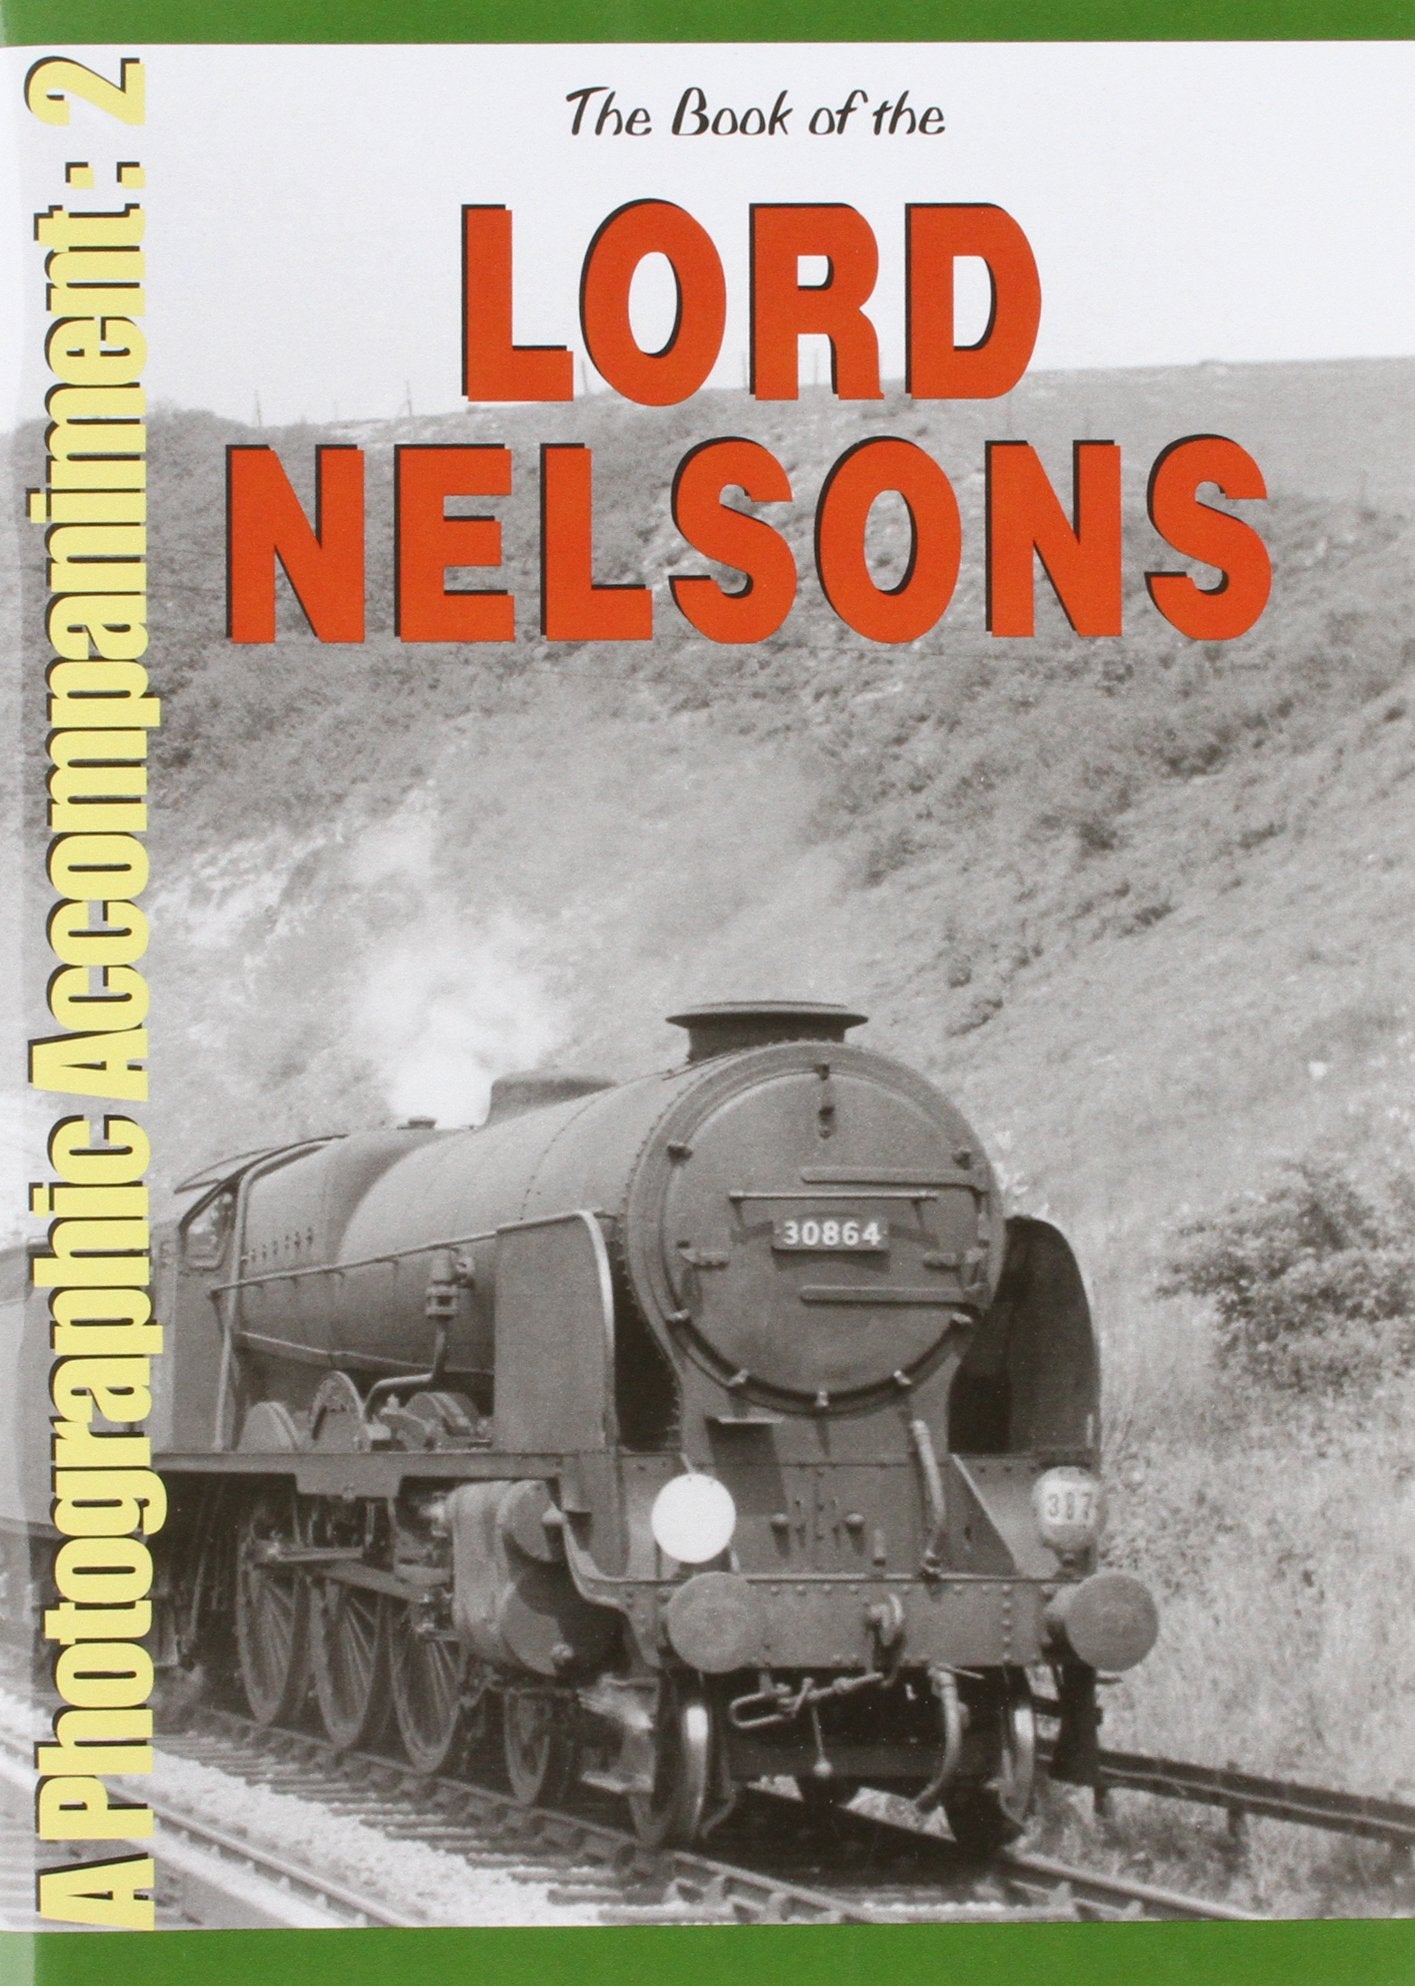 The Book of the LORD NELSONS - A Photographic Accompaniment 2 (LAST FEW COPIES)